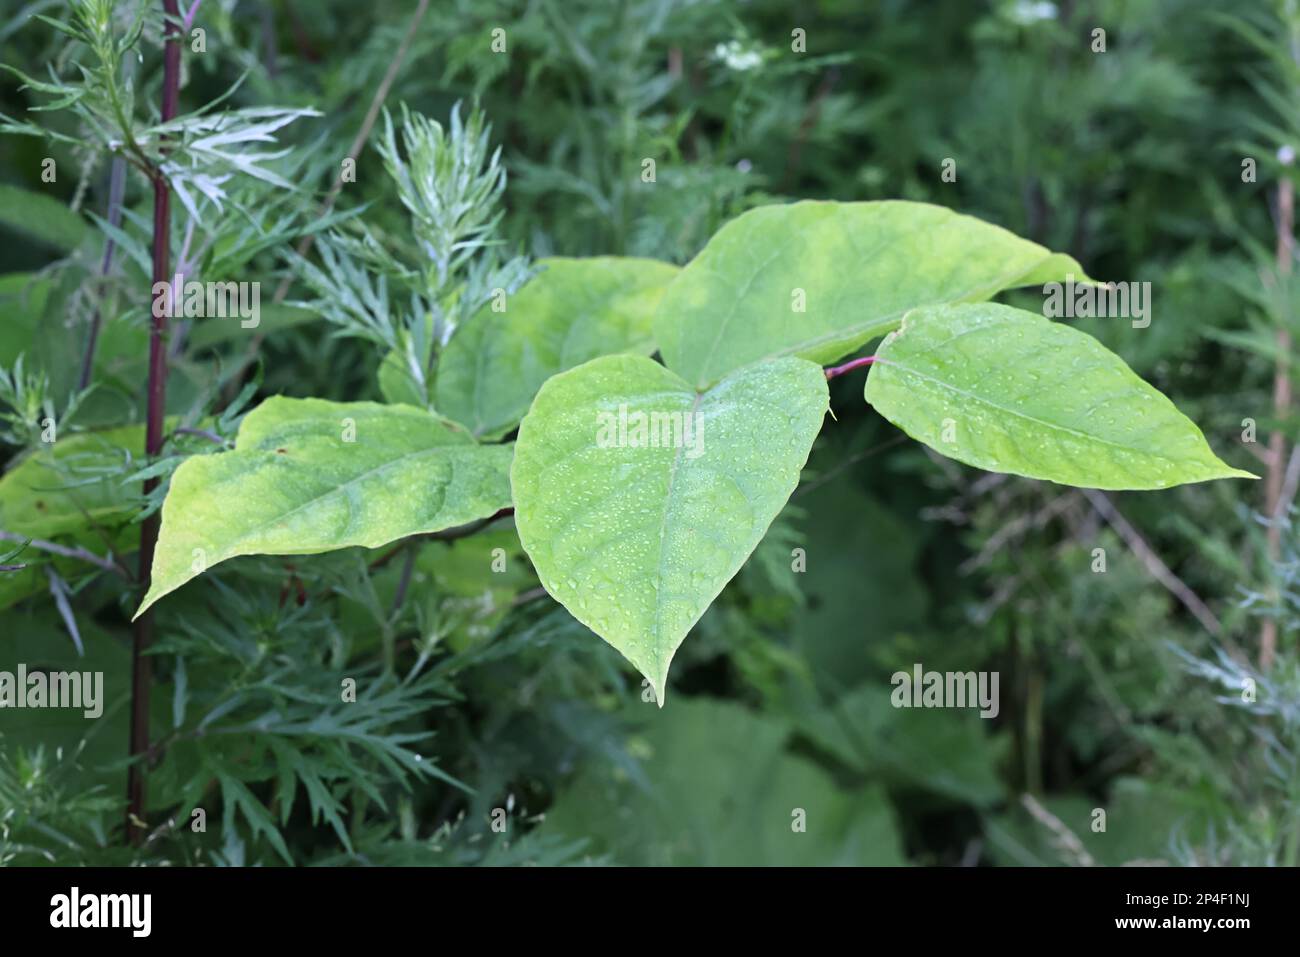 Japanese Knotweed, Reynoutria japonica, also known as American bamboo, Asian knotweed or Crimson beauty, higjly invasive plant from Finland Stock Photo